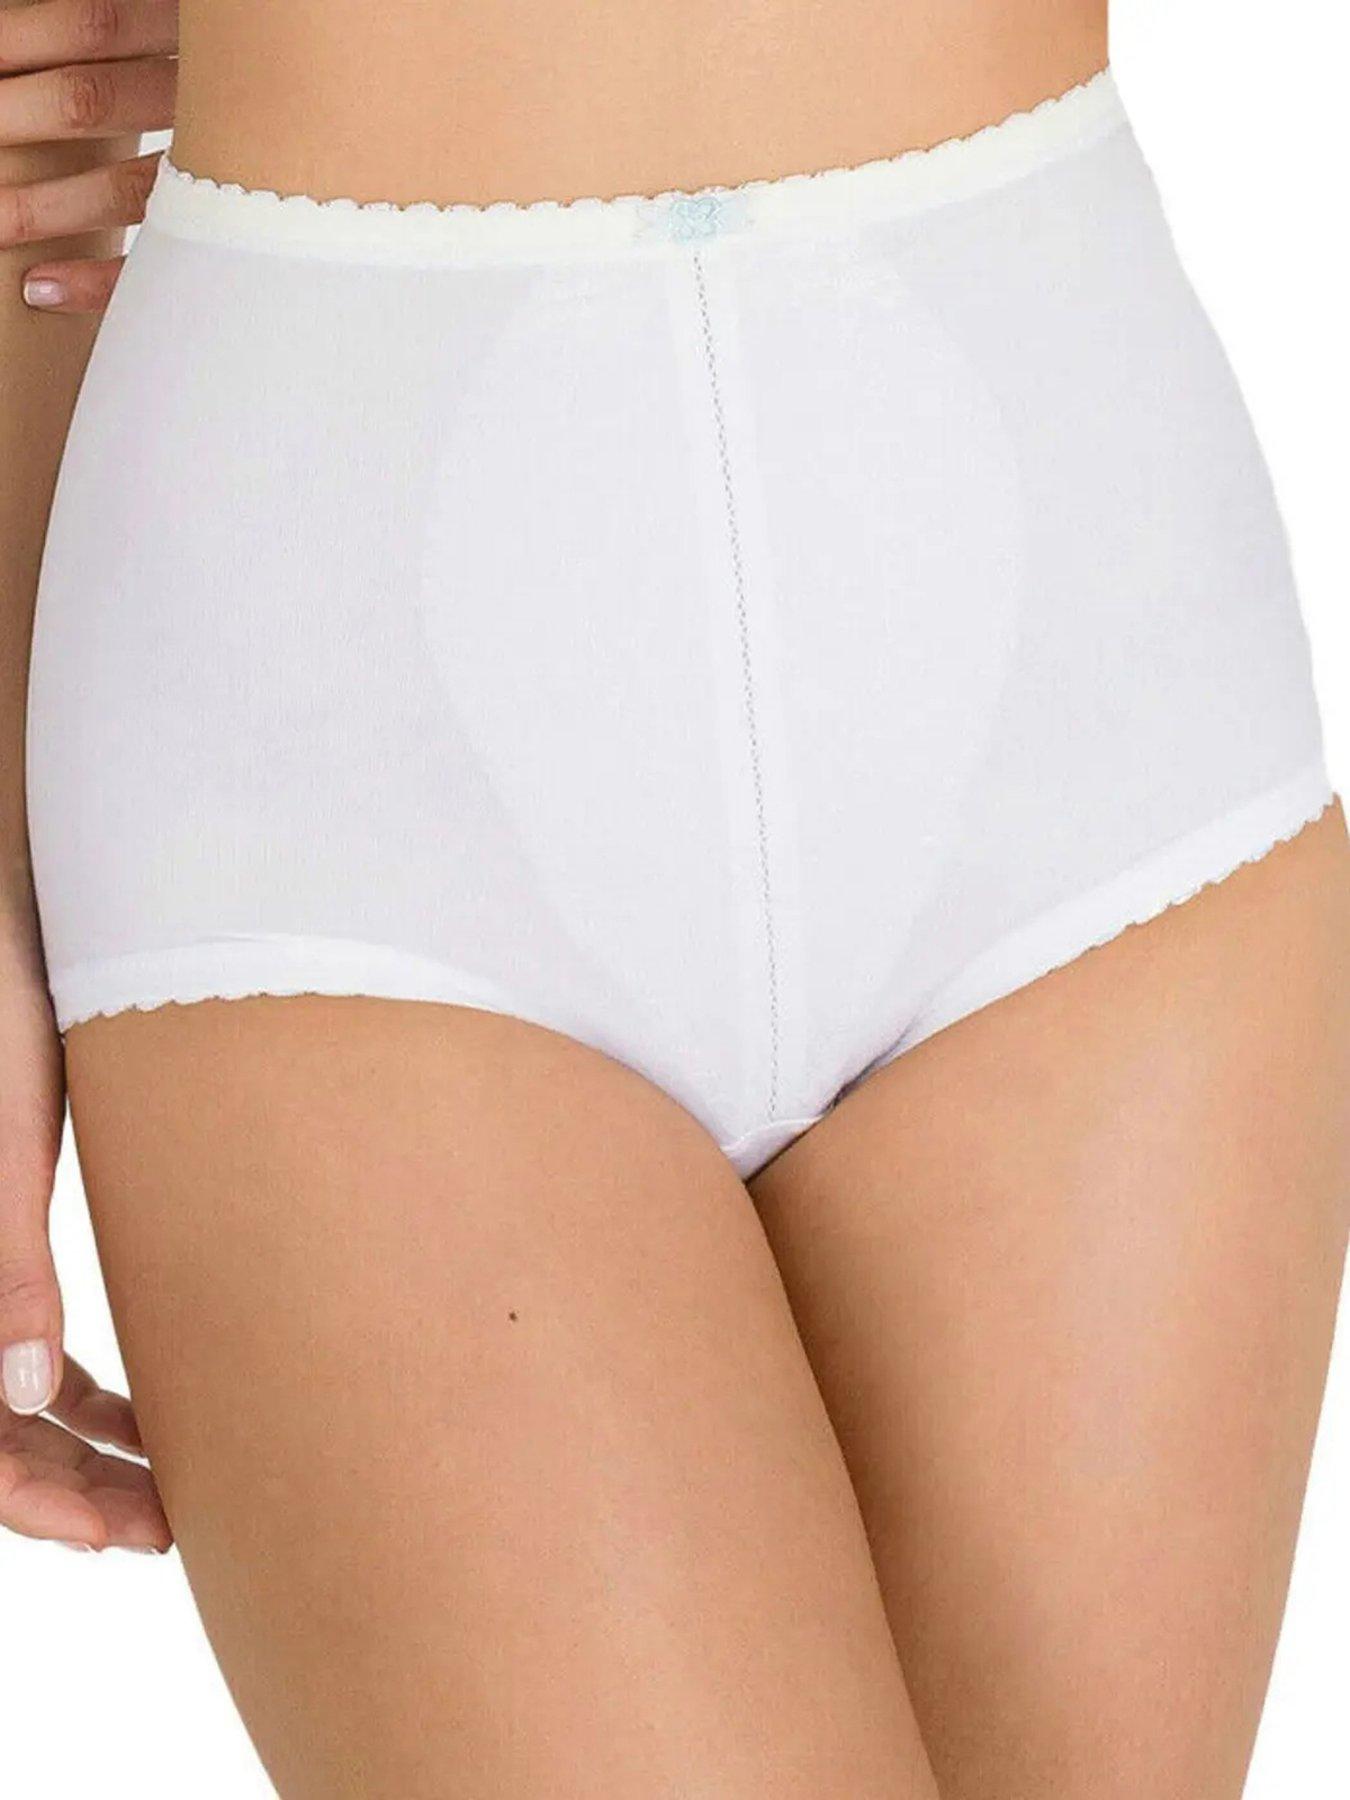 Playtex I Cant Believe It's A Girdle - White